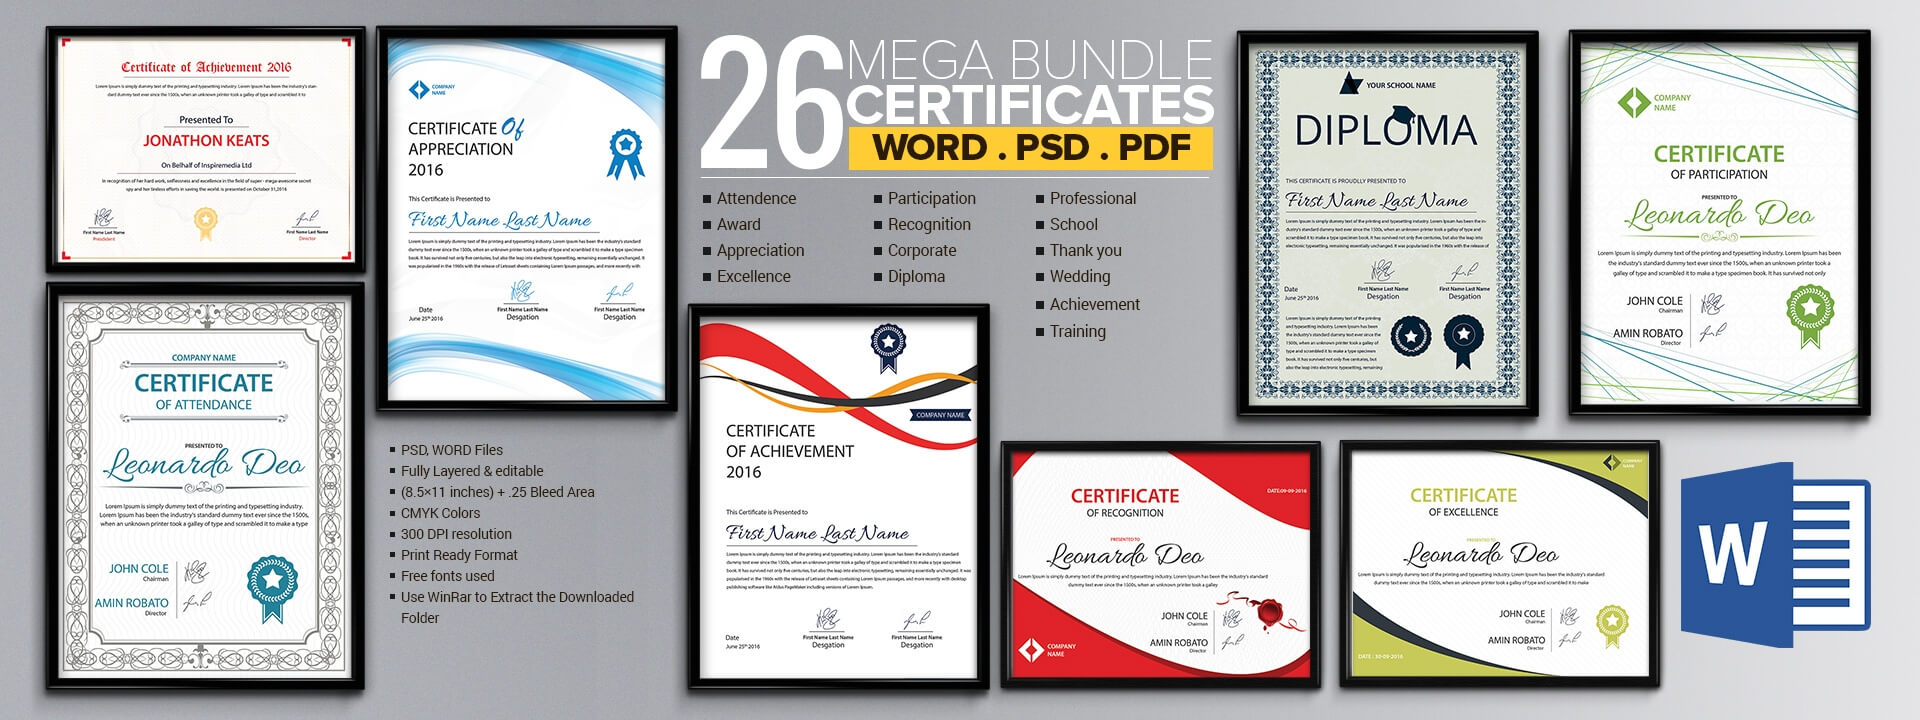 Word Certificate Template – 53+ Free Download Samples Regarding Downloadable Certificate Templates For Microsoft Word